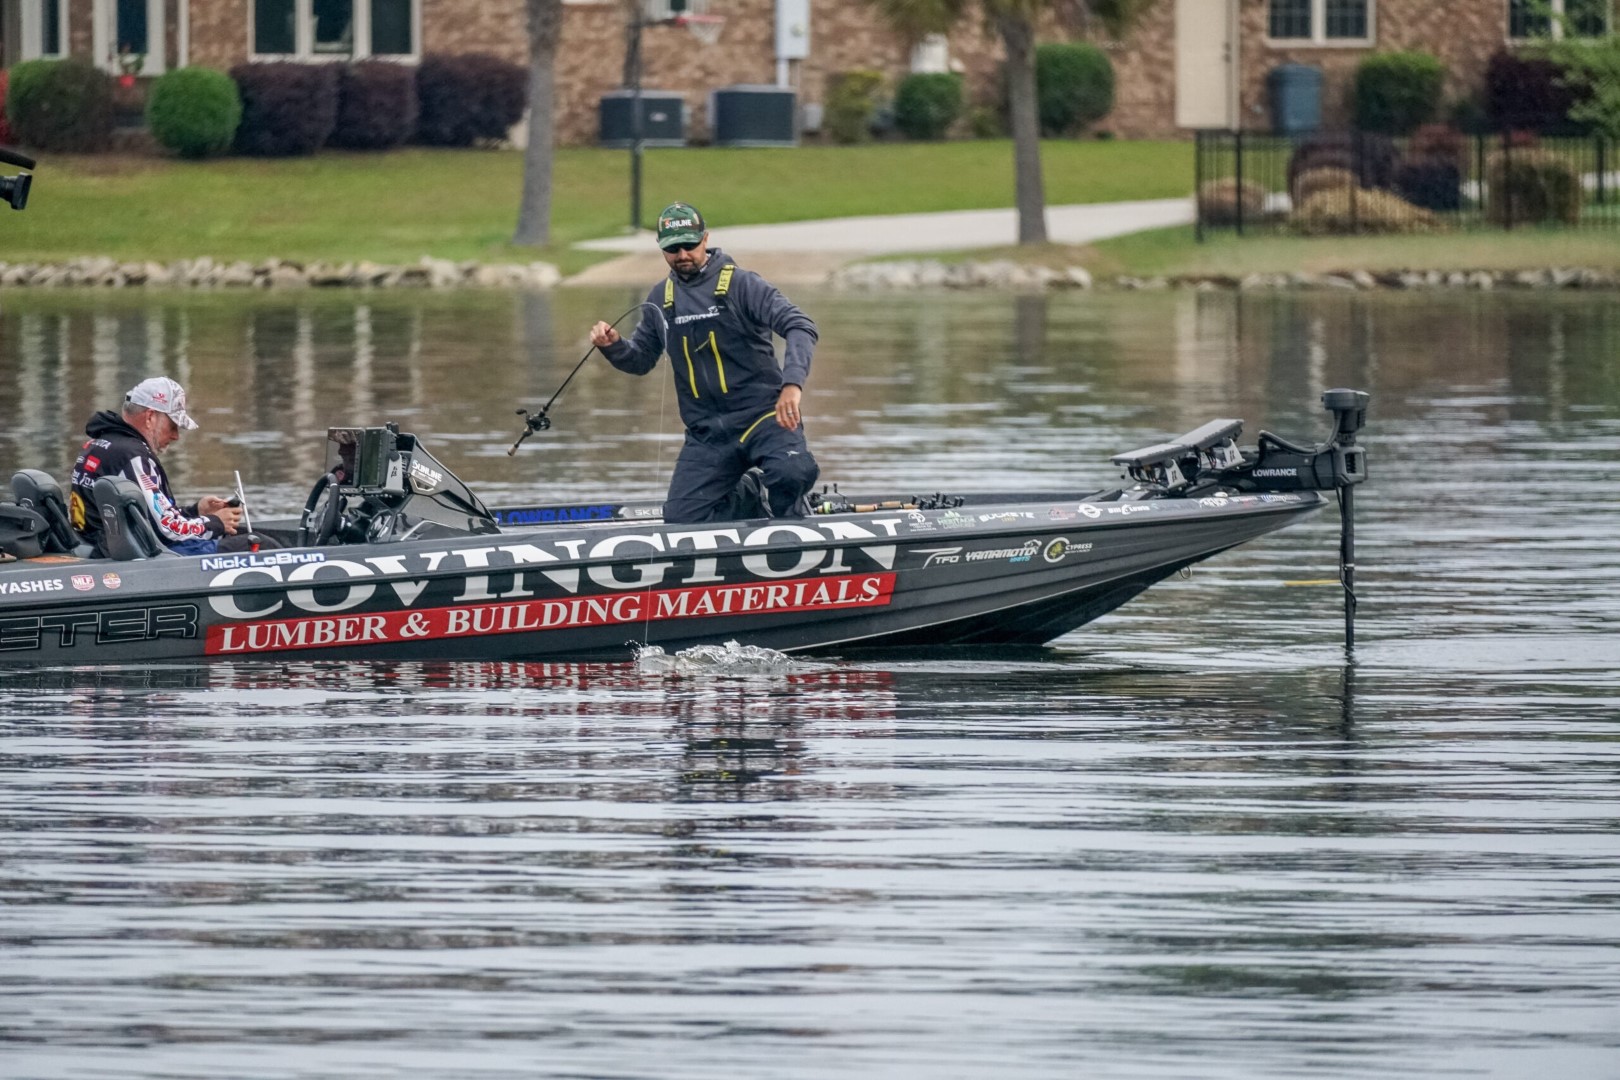 Probass Networks: Organization in your boat and in your home